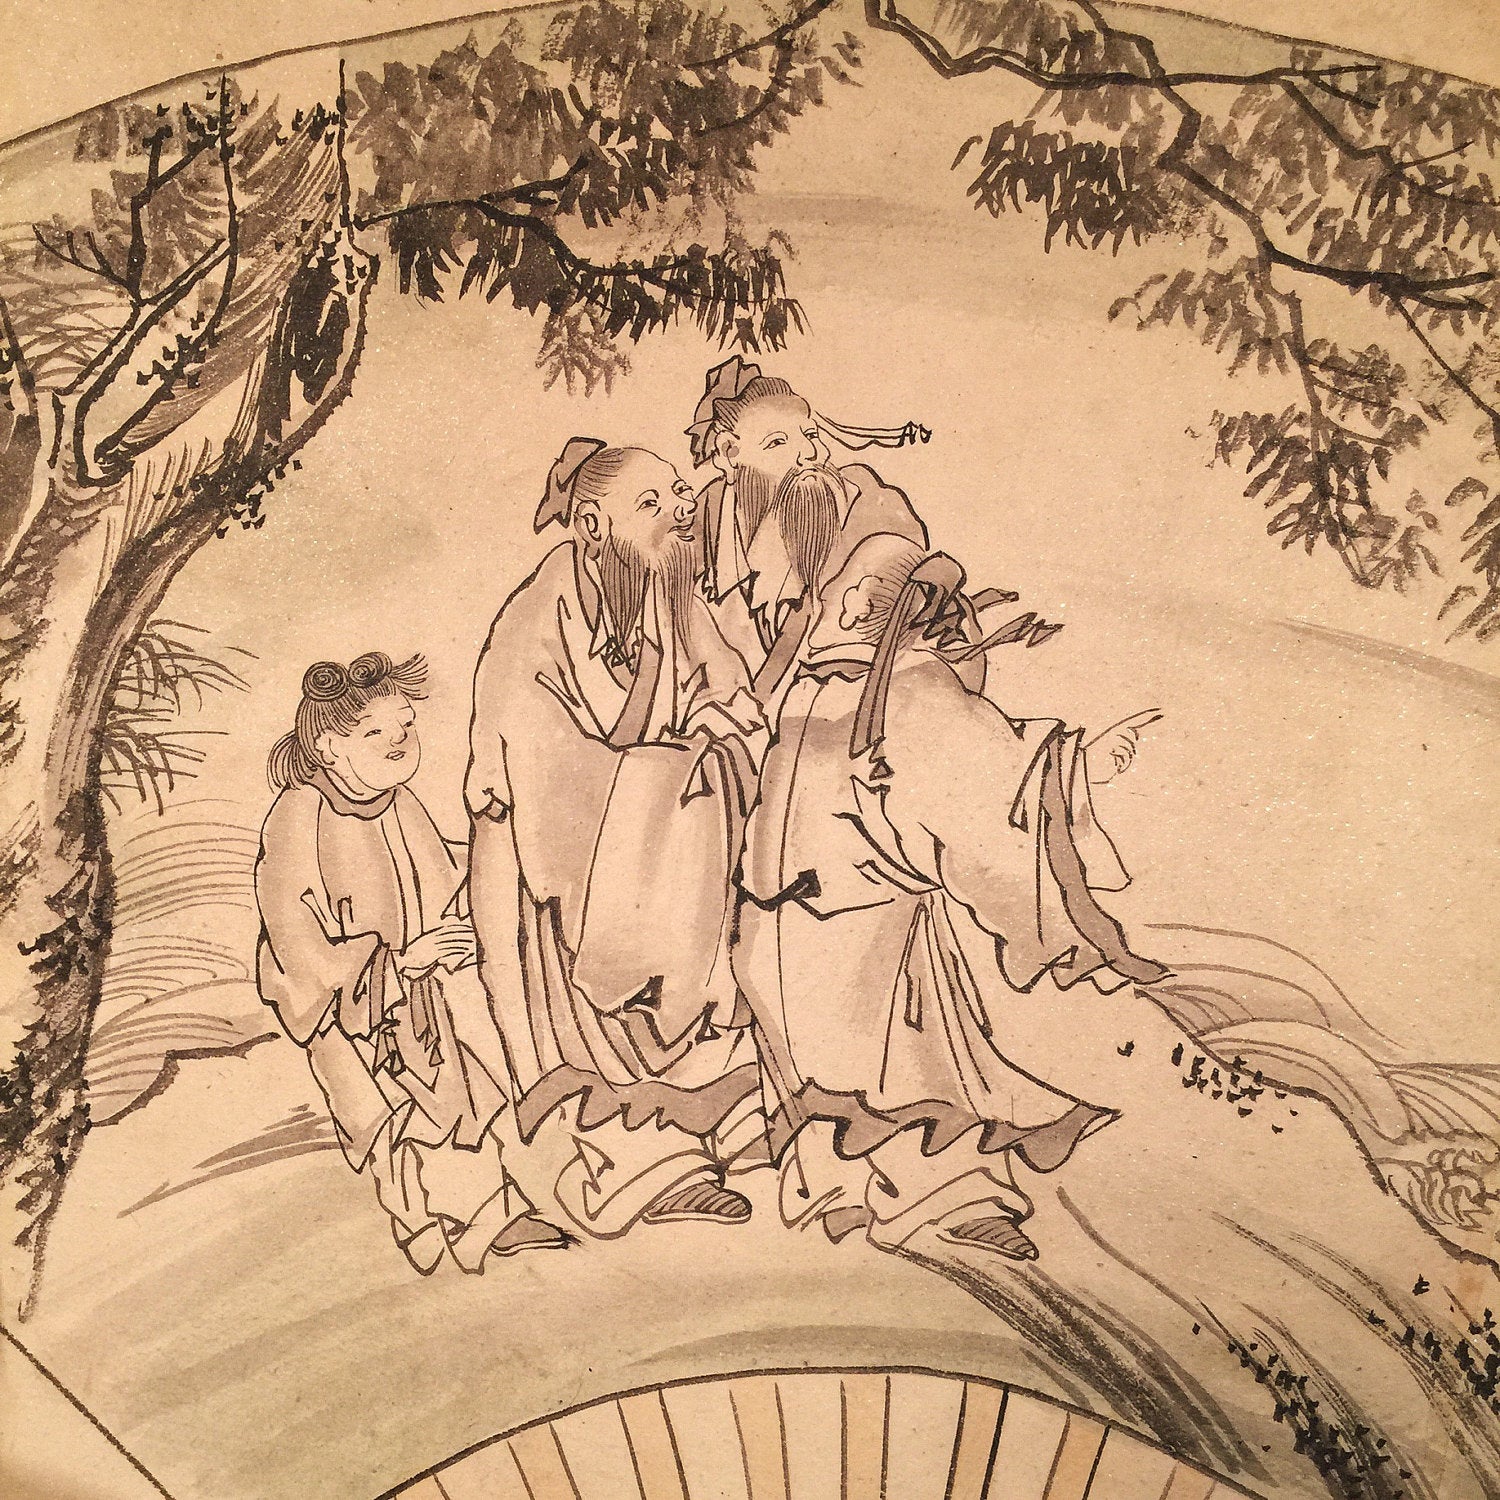 Kano School Fan Painting on Paper - Early 1800s - Japanese - 19th Century - Death - Rare - AS IS - Japanese art - Japanese Kano School art